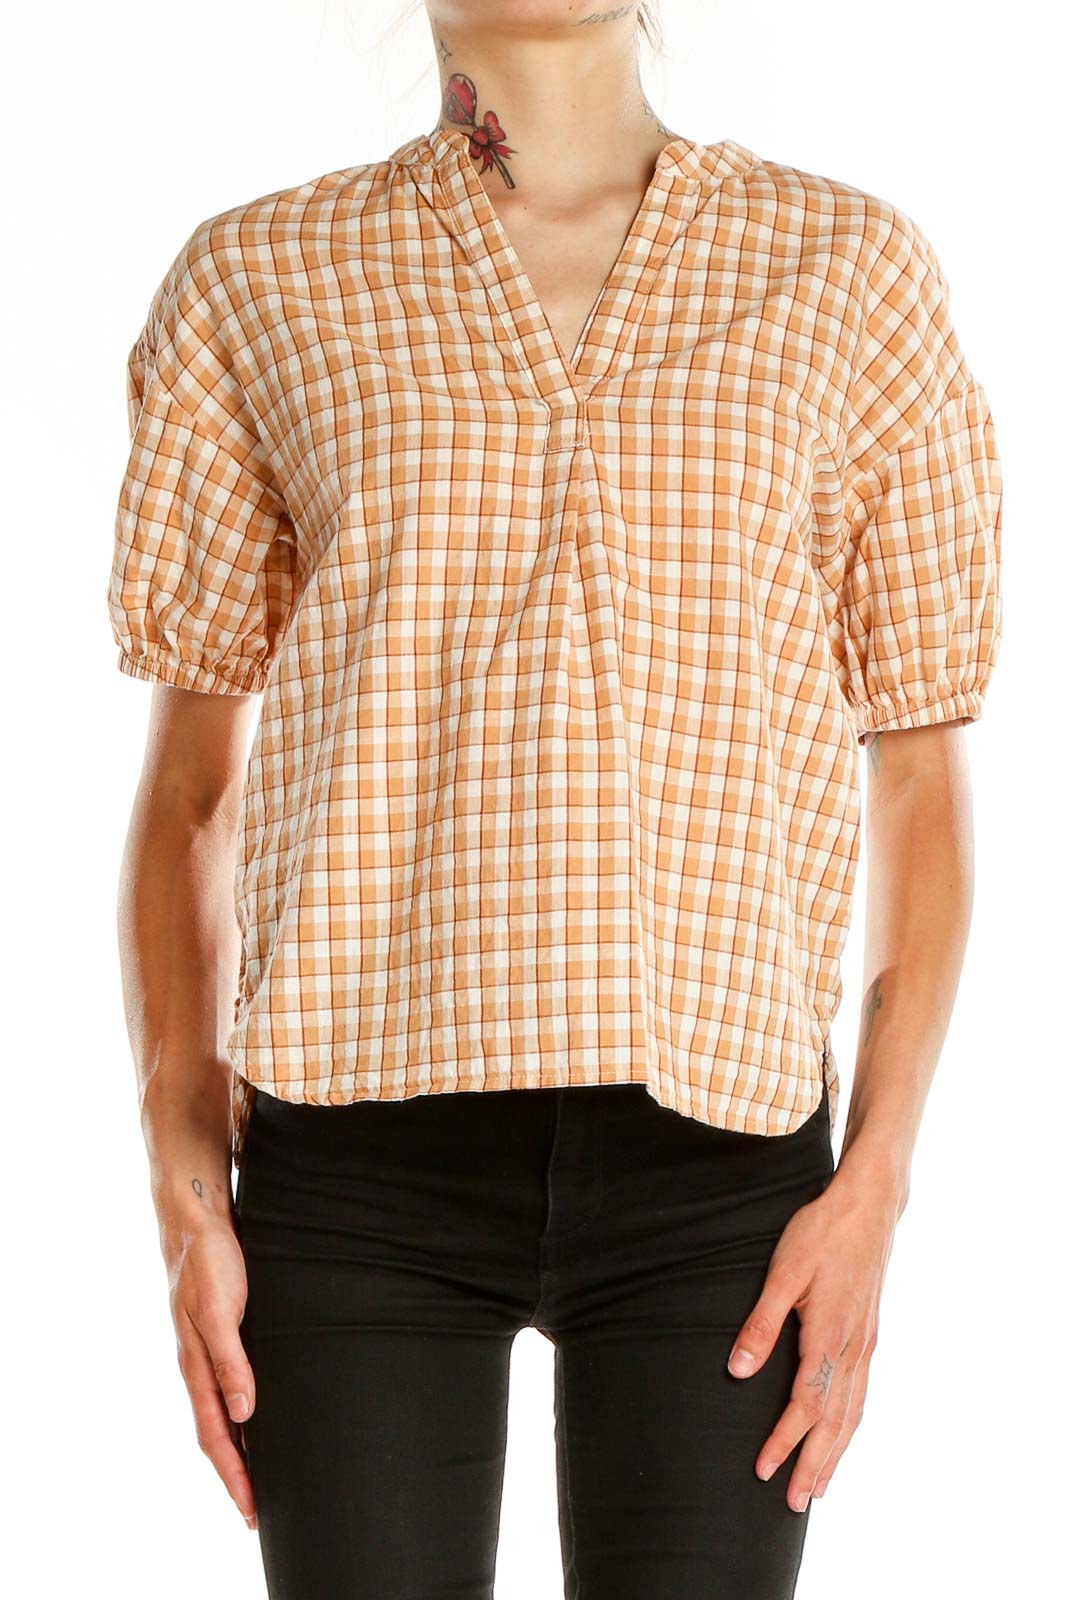 Orange Checkered Chic Blouse Front